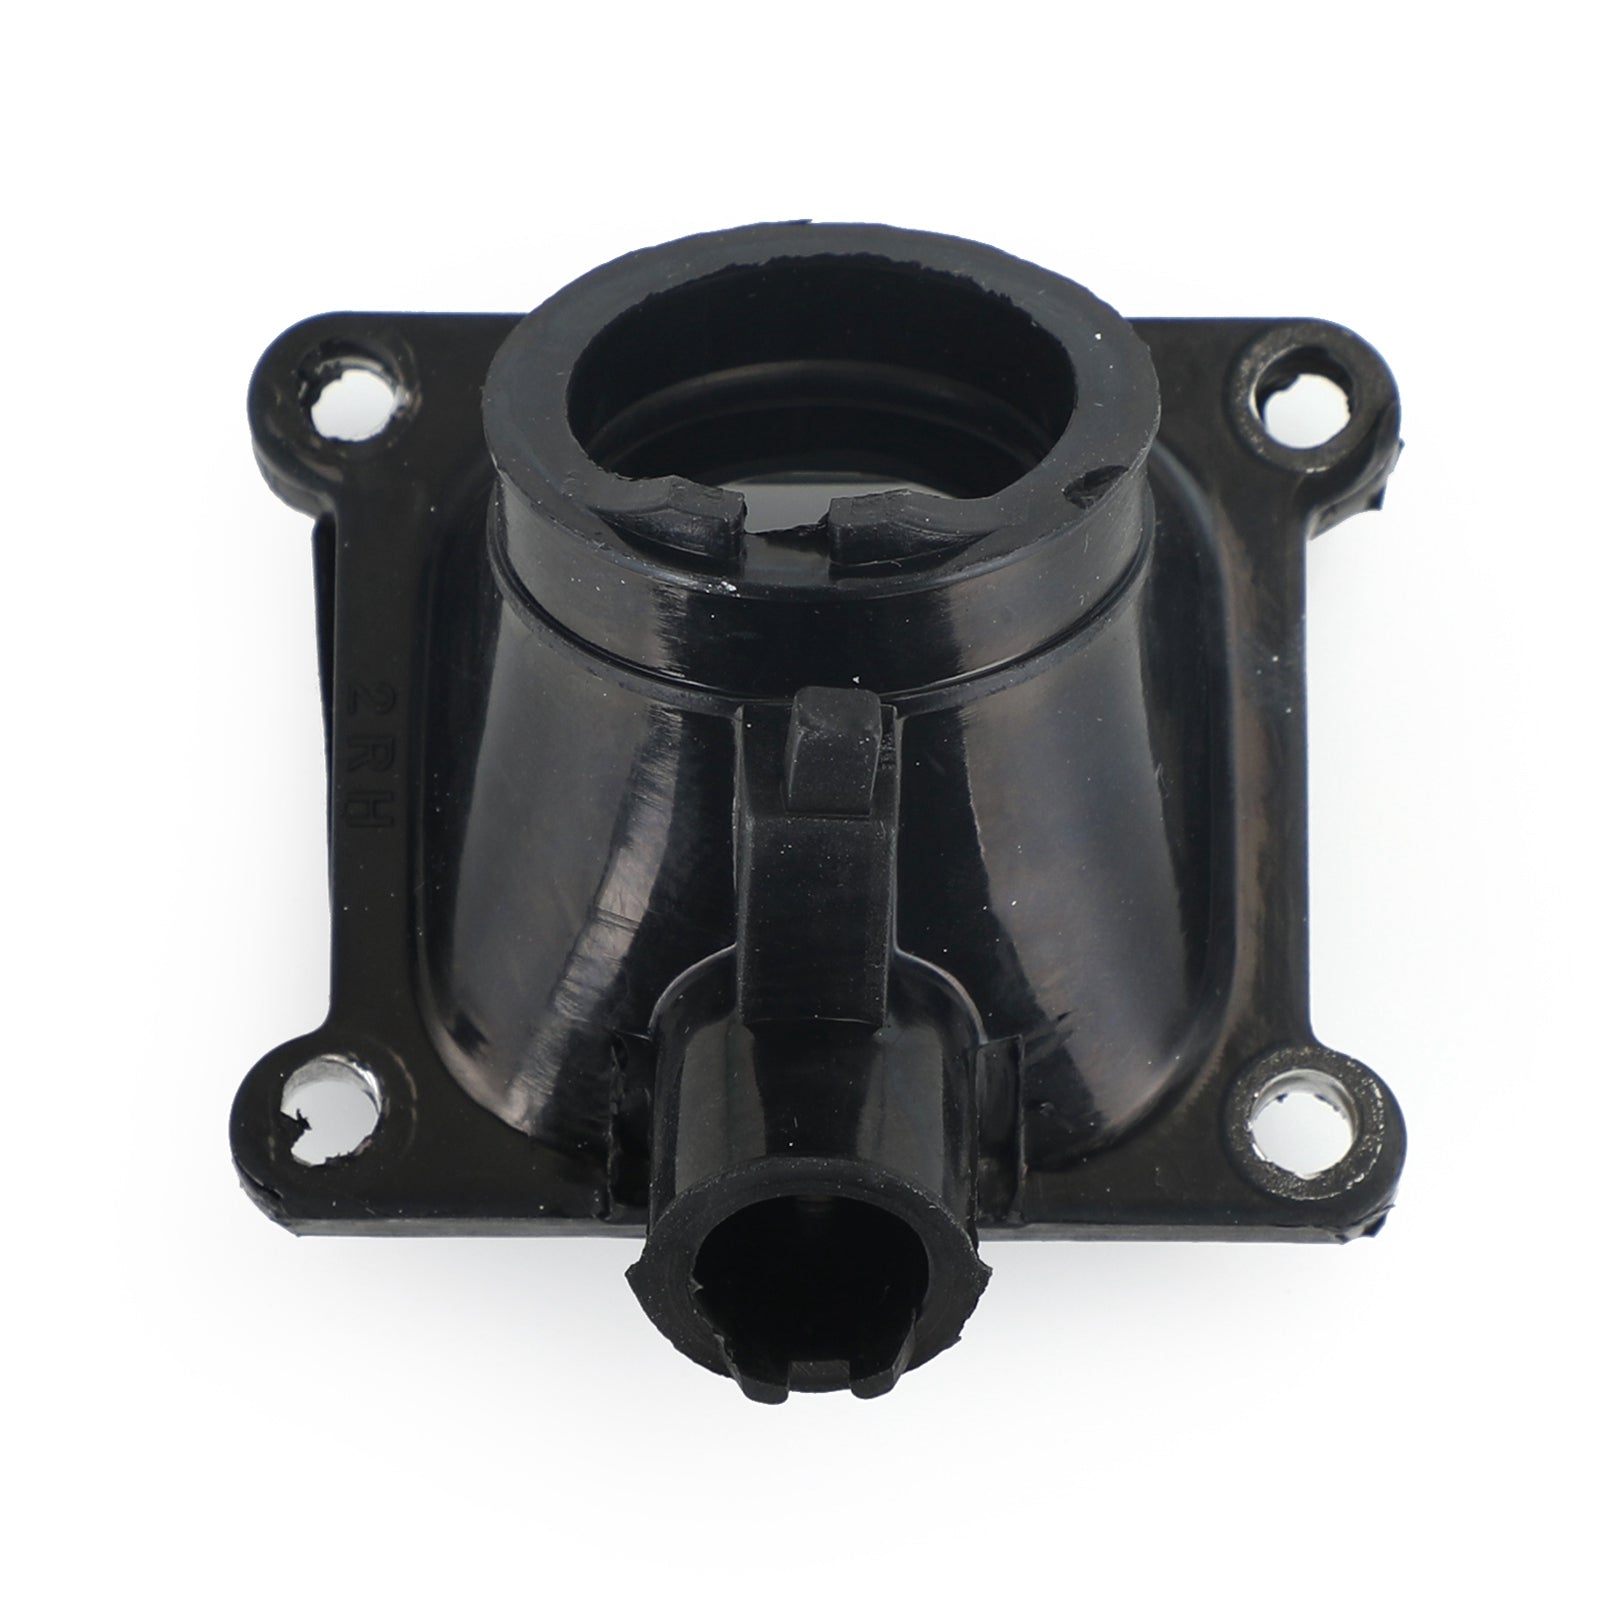 Intake Carb Joint Boot Insulator For Yamaha TZR125 TZR125L 87-94 2RH-13565-00 Generic